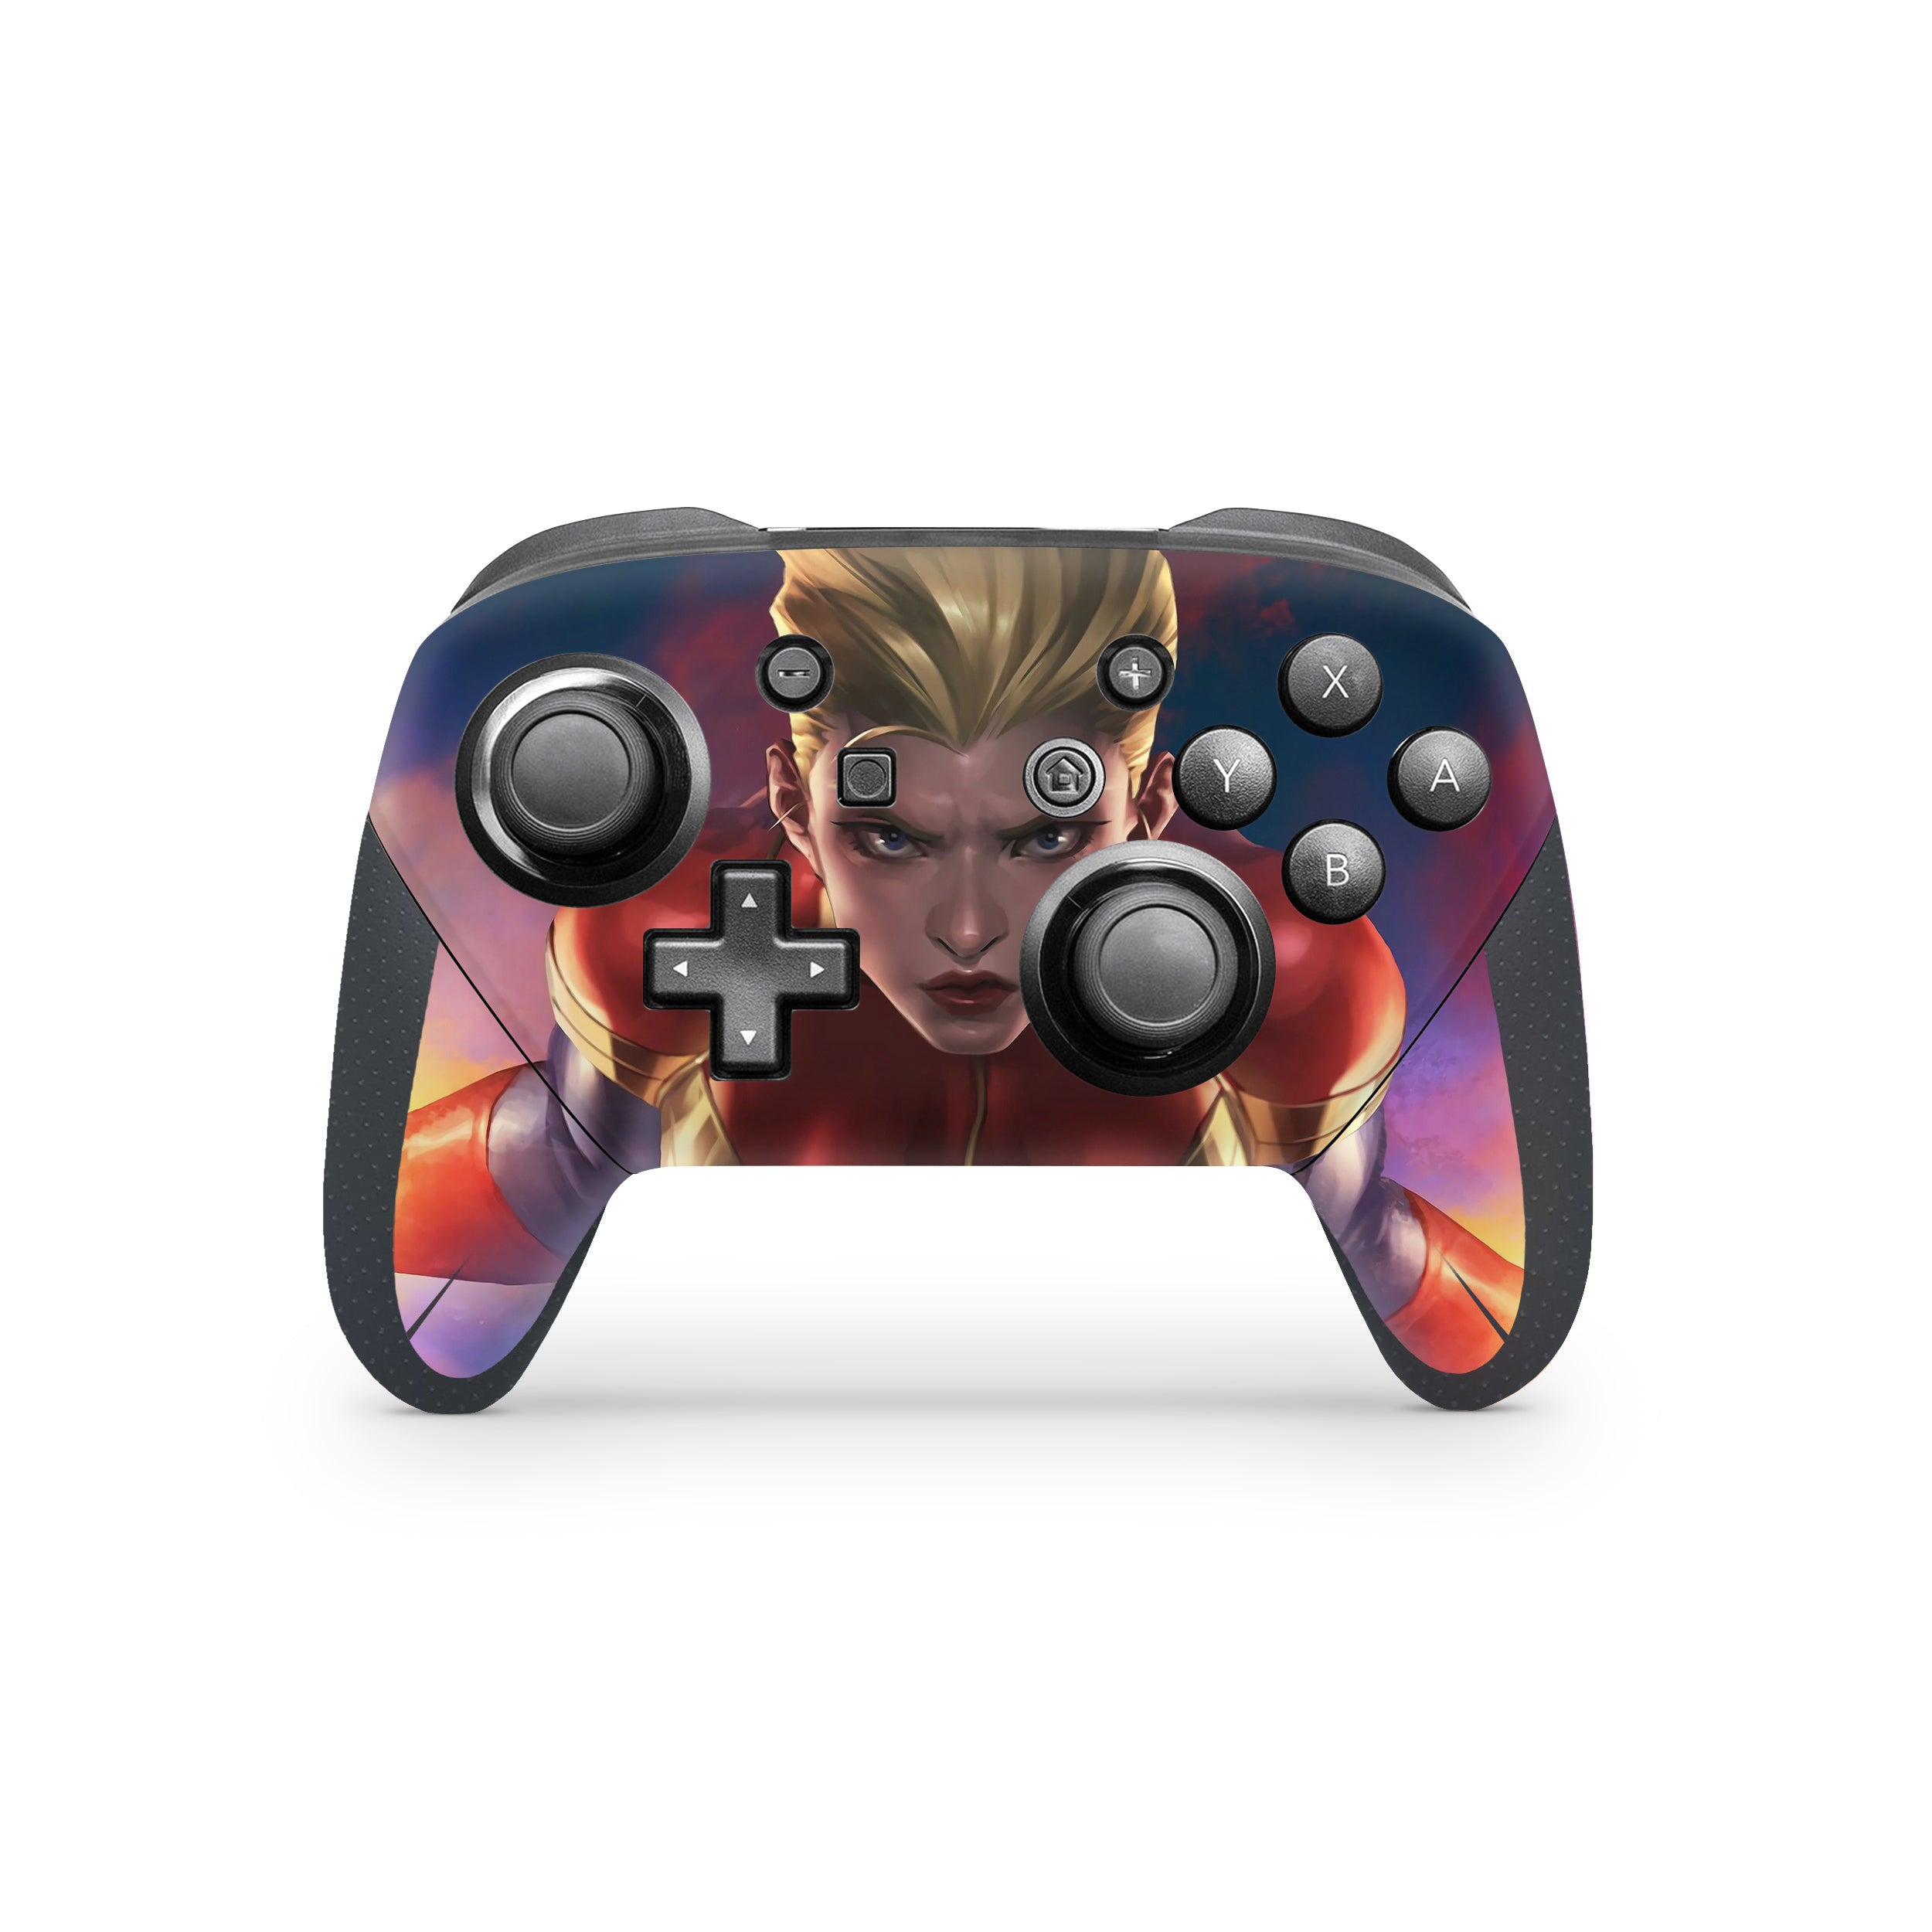 A video game skin featuring a Marvel Captain Marvel design for the Switch Pro Controller.